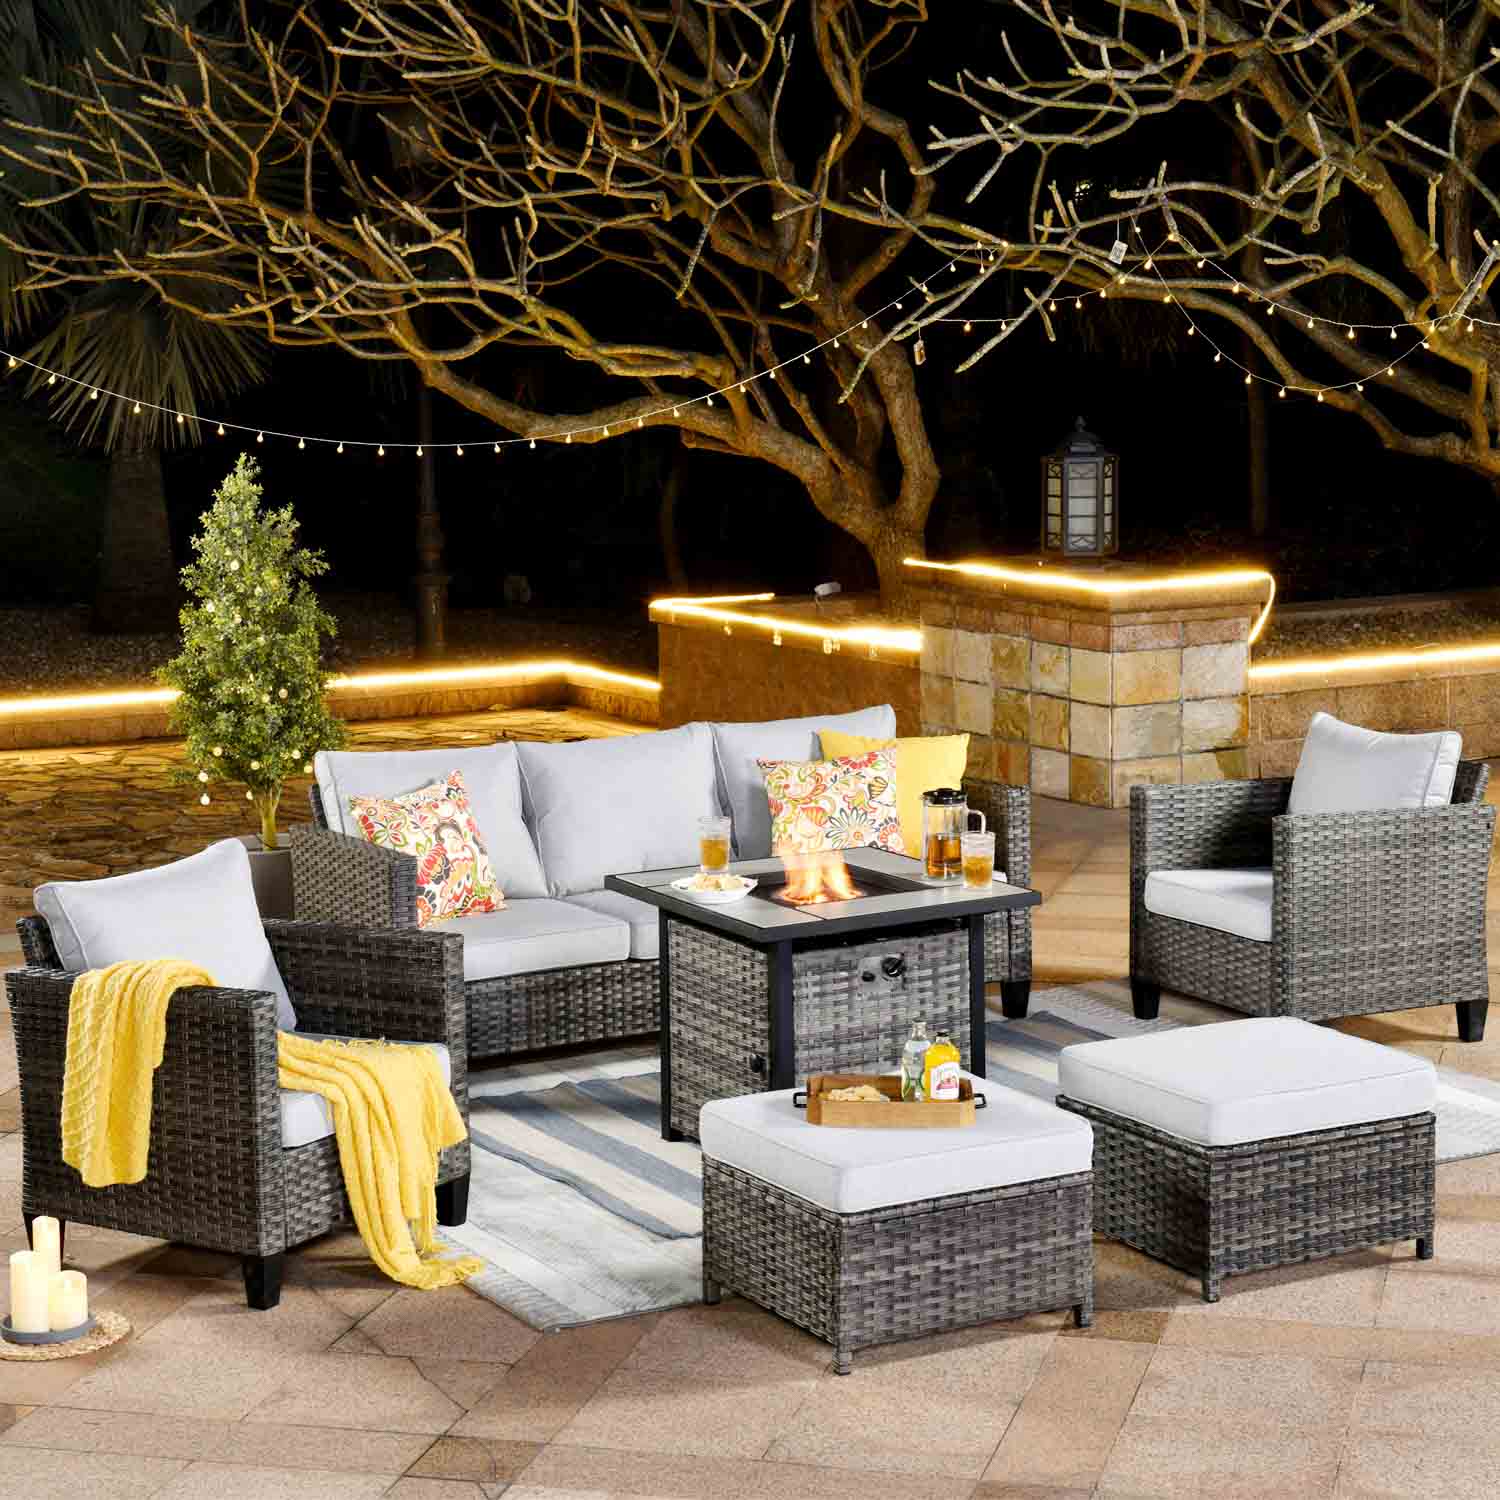 5 Reasons a Patio Fire Pit Table Will Transform Your Outdoor Space